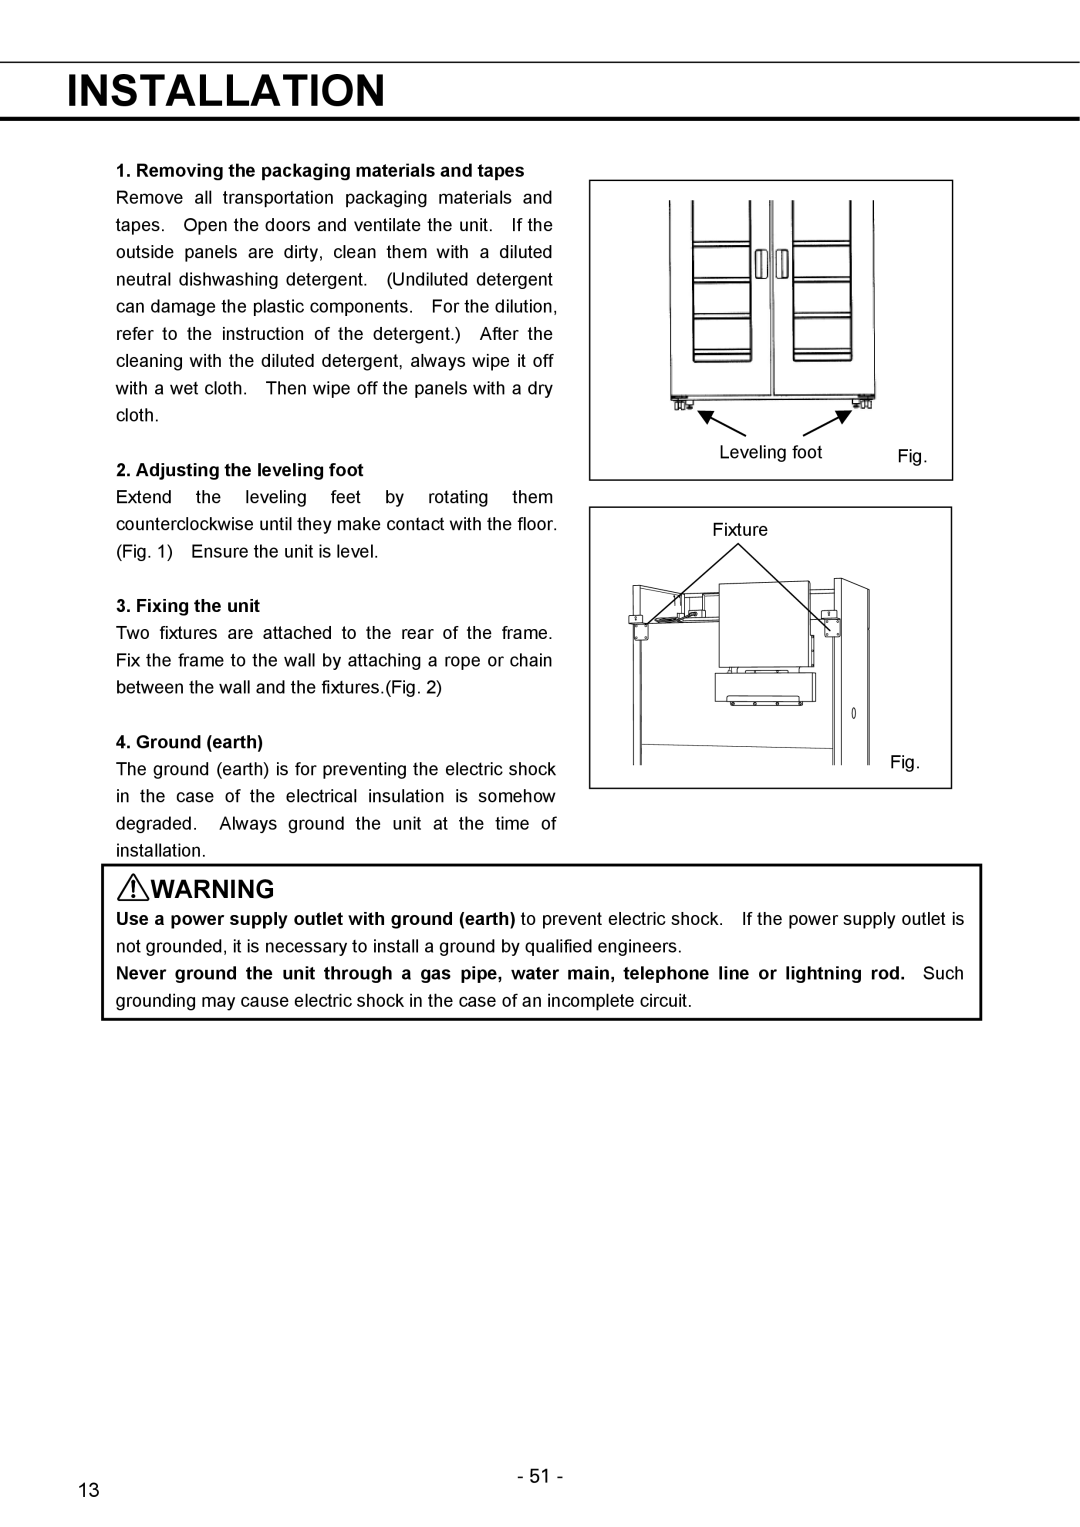 Sanyo MPR-1411R instruction manual Installation, Adjusting the leveling foot, Fixing the unit, Ground earth 